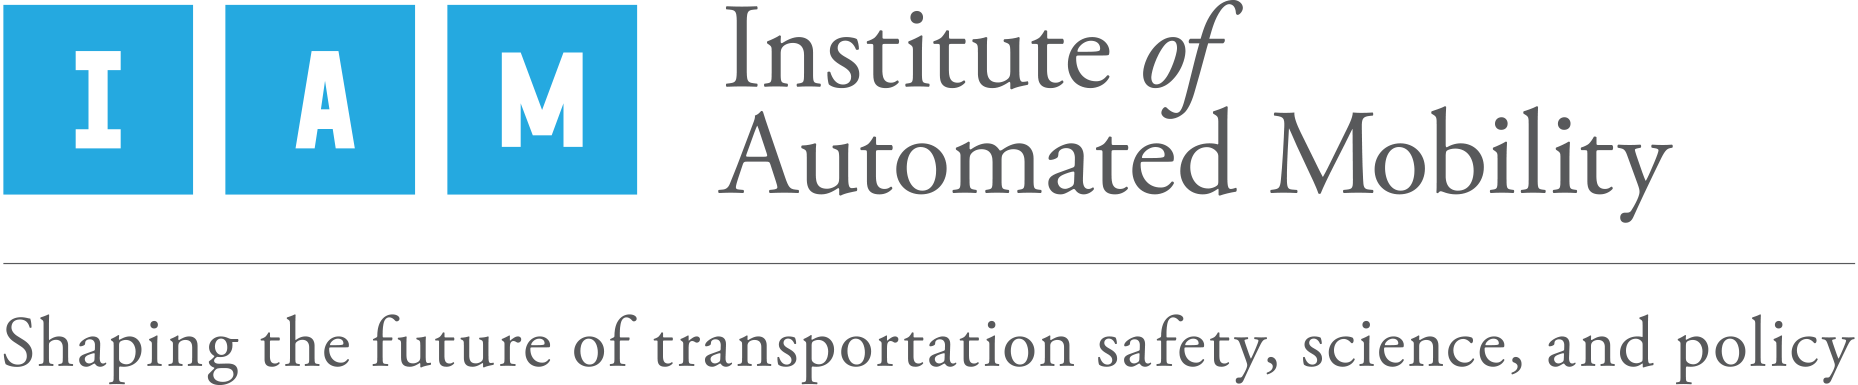 Institute of Automated Mobility Shaping the future of transportation safety, science and policy